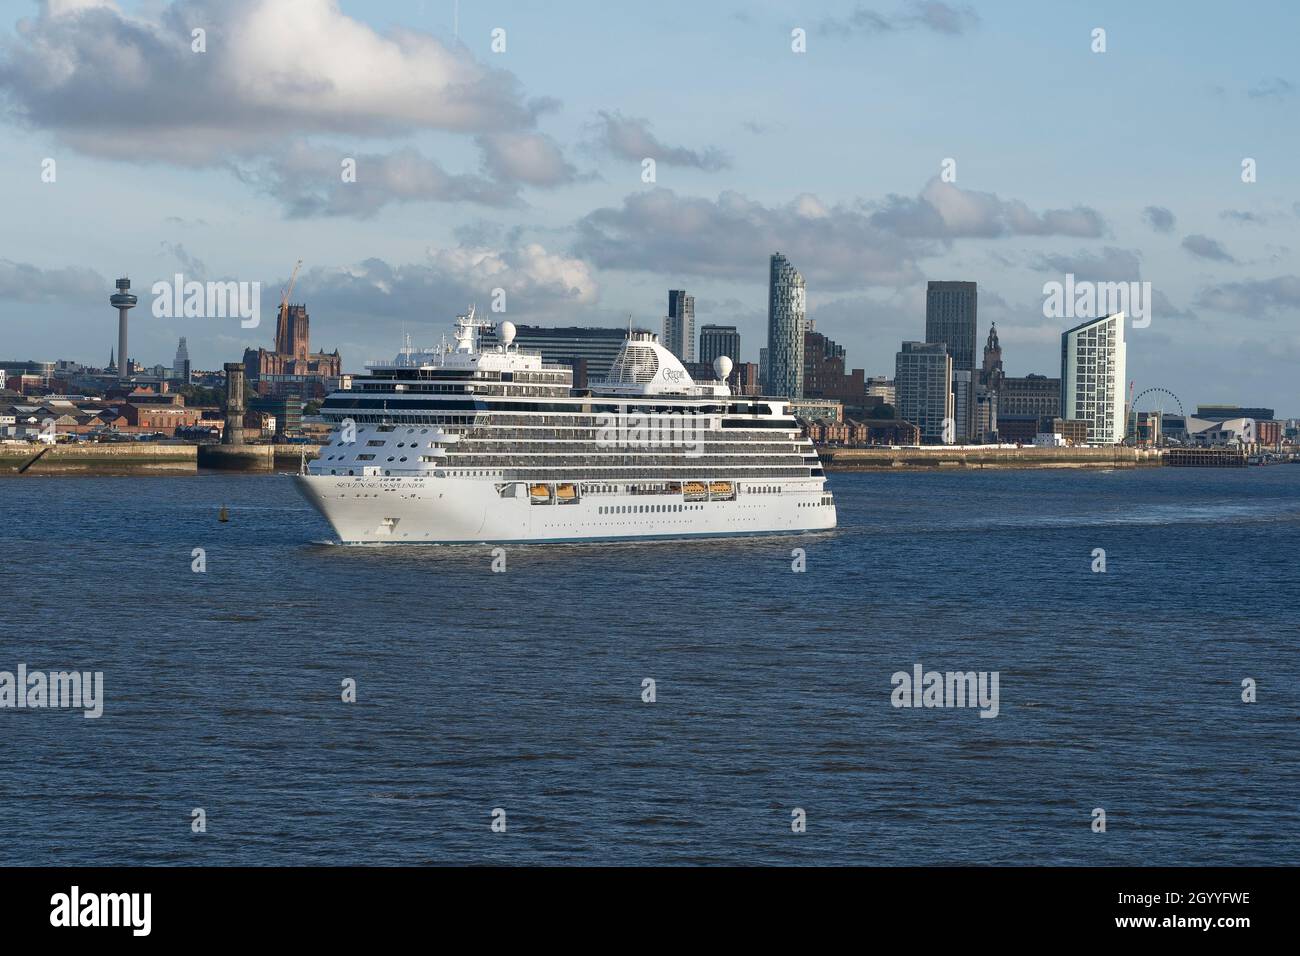 The Regent Seven Seas cruise ship Seven Seas Splendor leaves Liverpool with the city skyline in the background Stock Photo